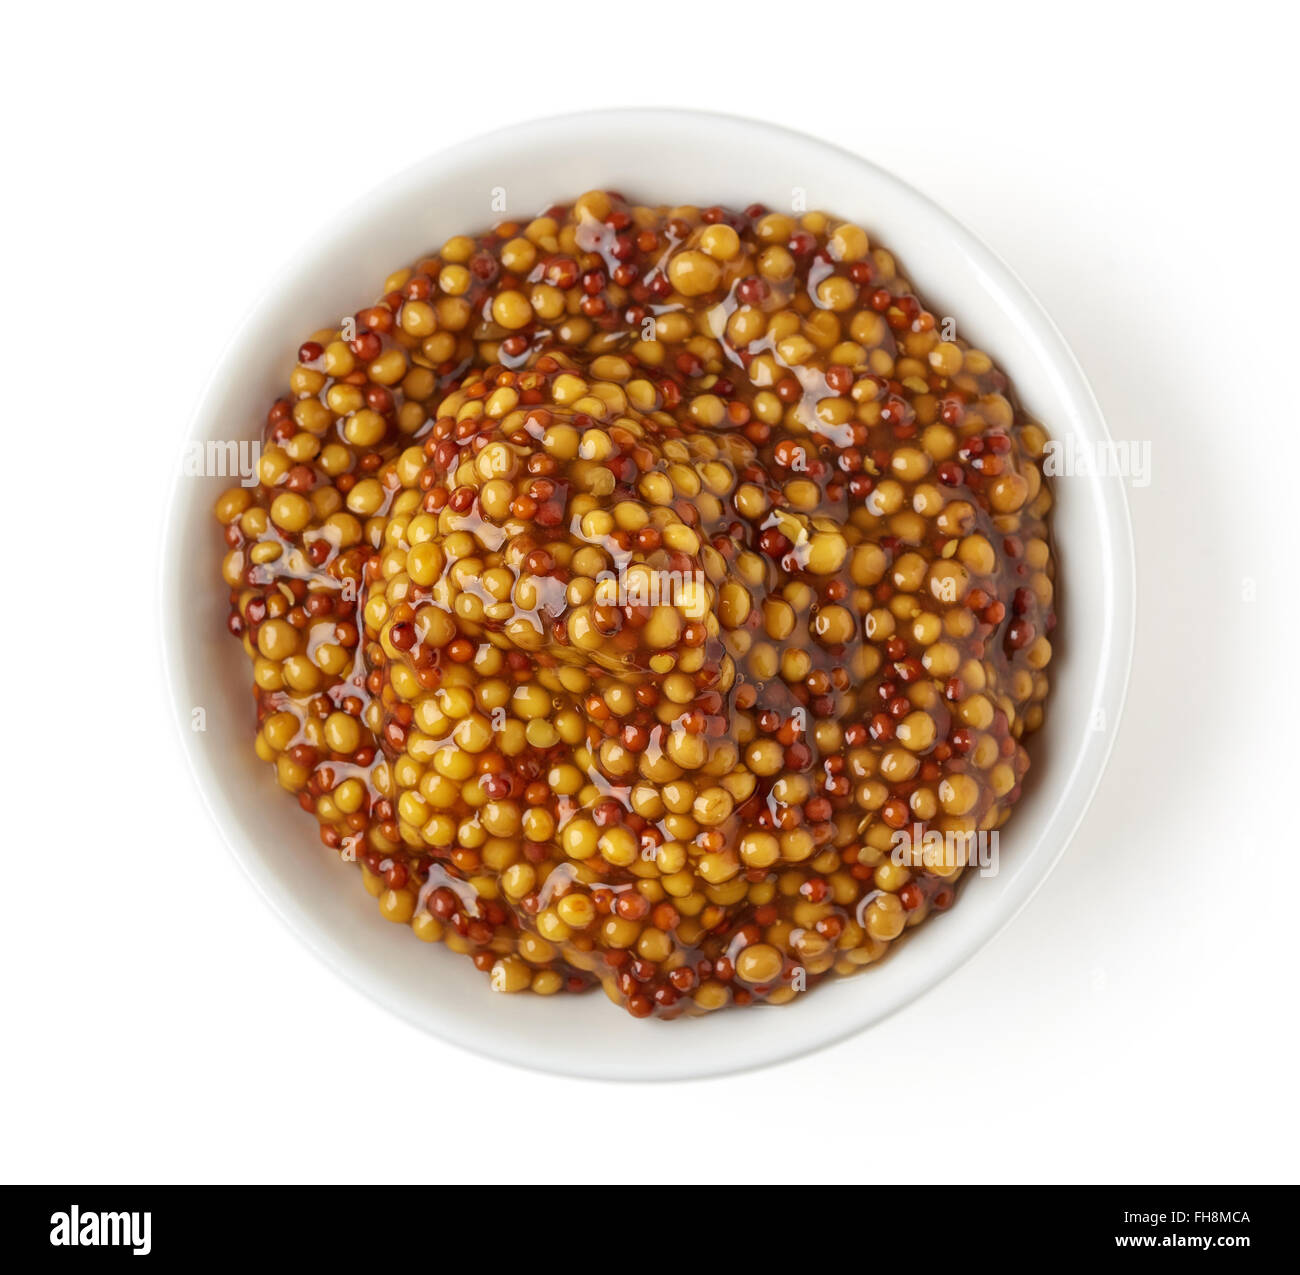 Bowl of full wholegrain mustard on white background, top view Stock Photo